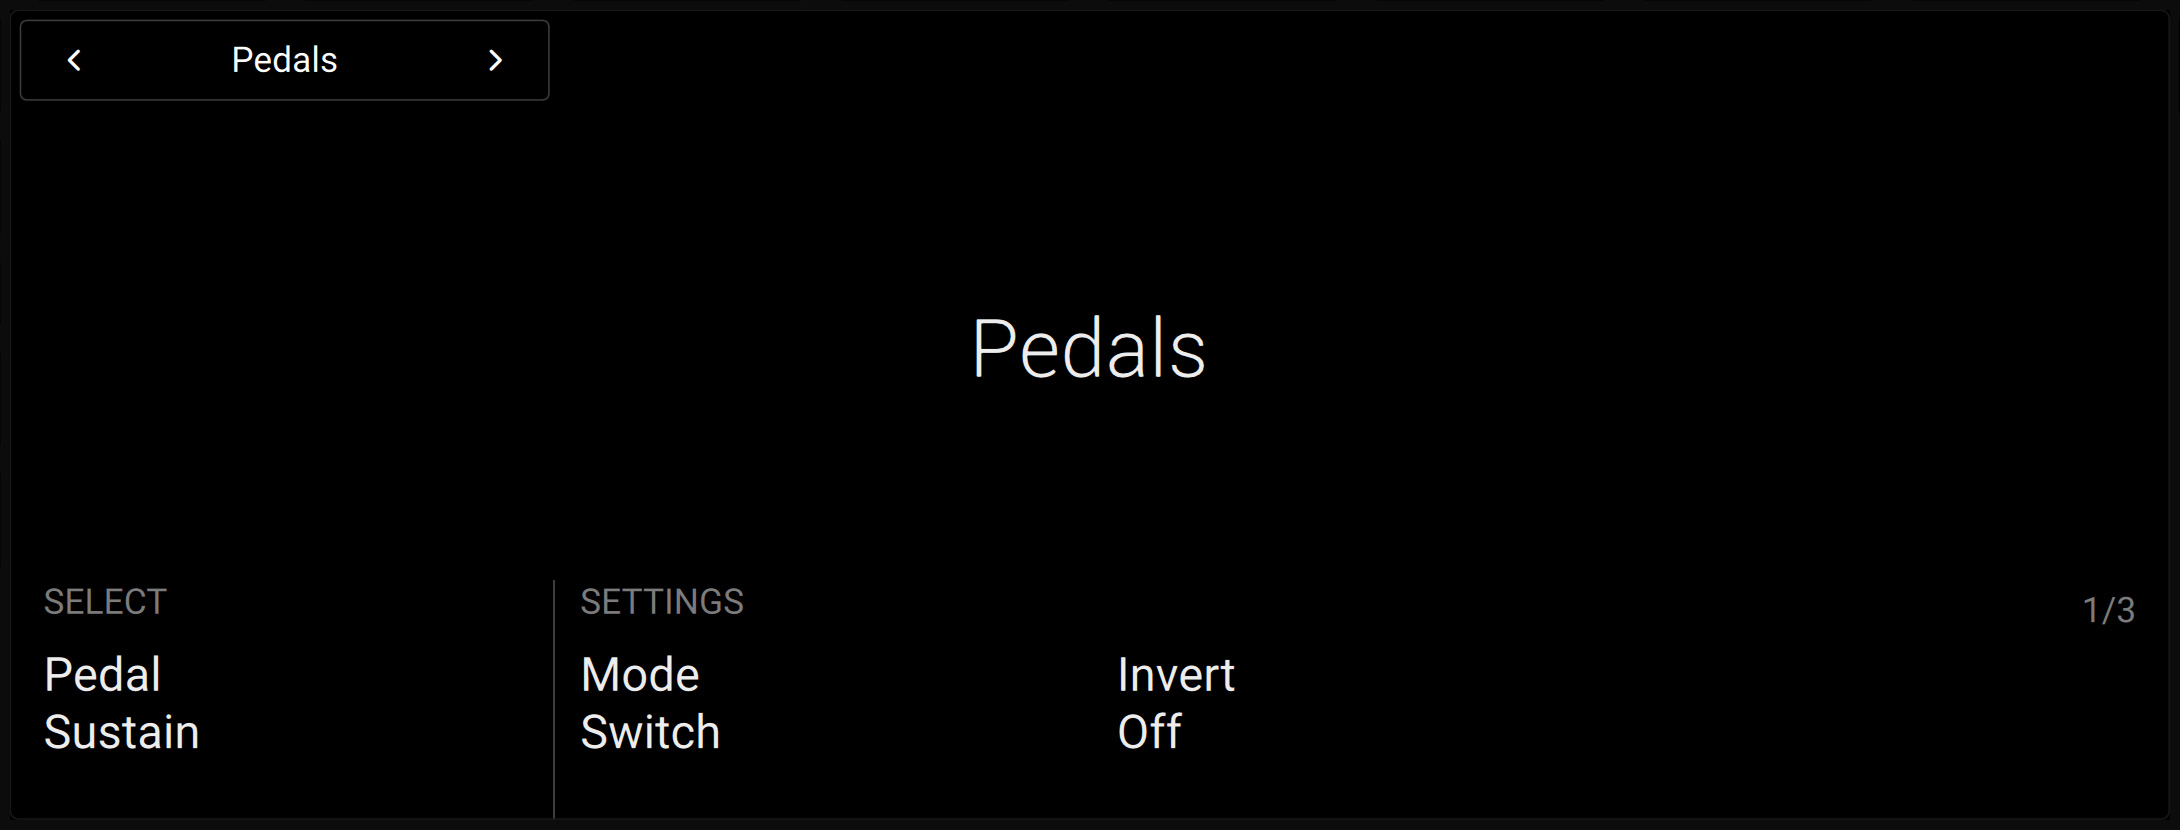 KS-MK3_D_Settings-Pedals-Switch-Page1.jpg